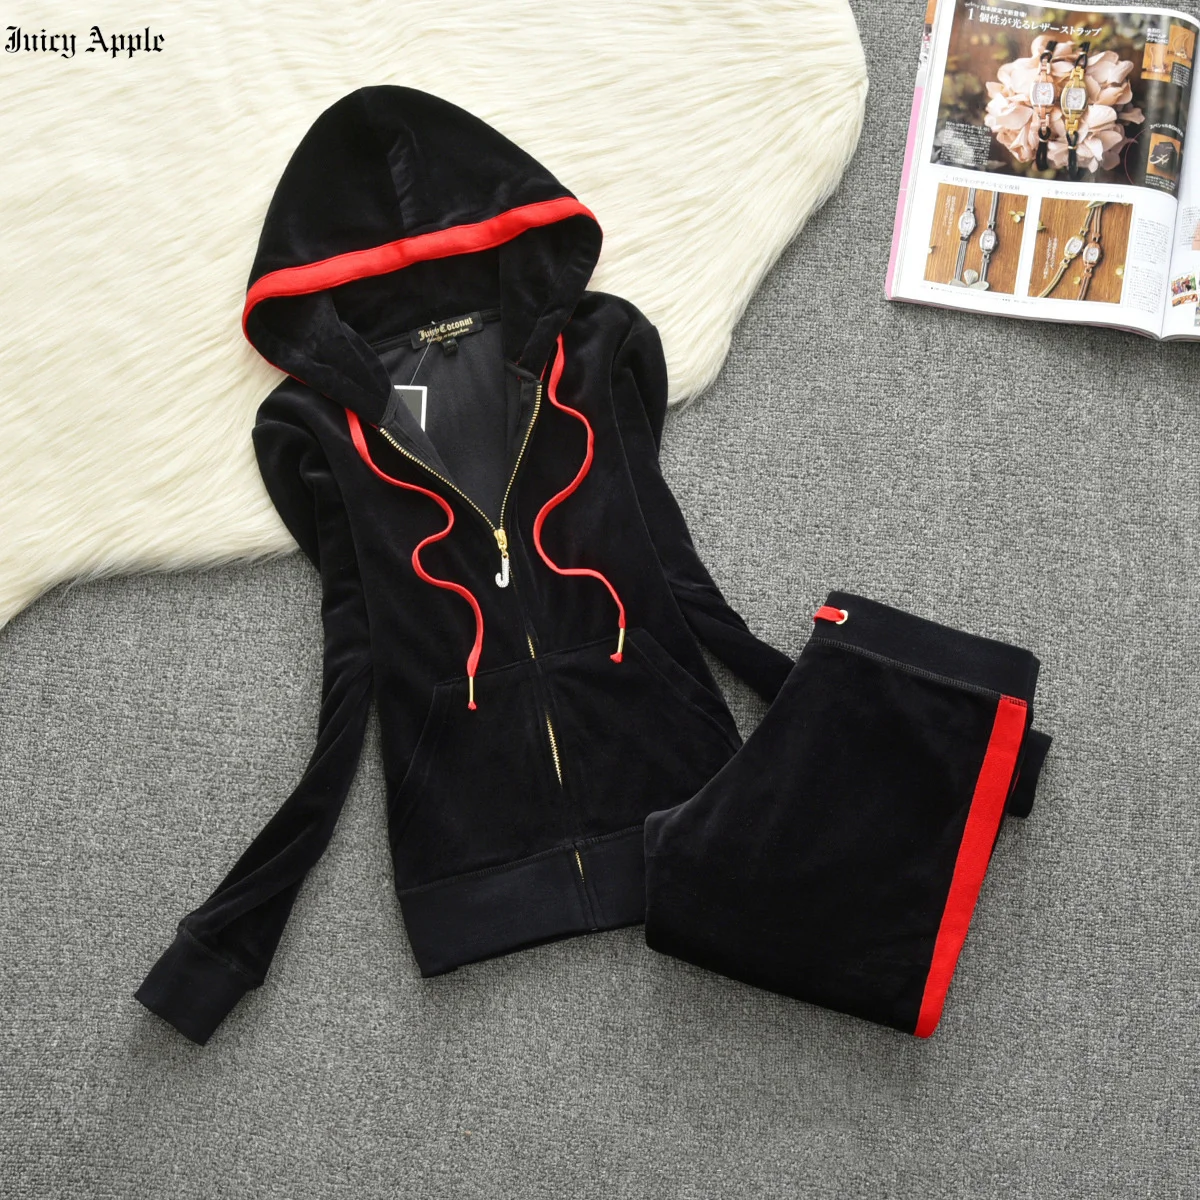 Juicy Apple Tracksuit 2023 Autumn 2 Piece Sets Womens Outfits Sports And Leisure Suit Fashion Hooded Tops Long-sleeved Trousers